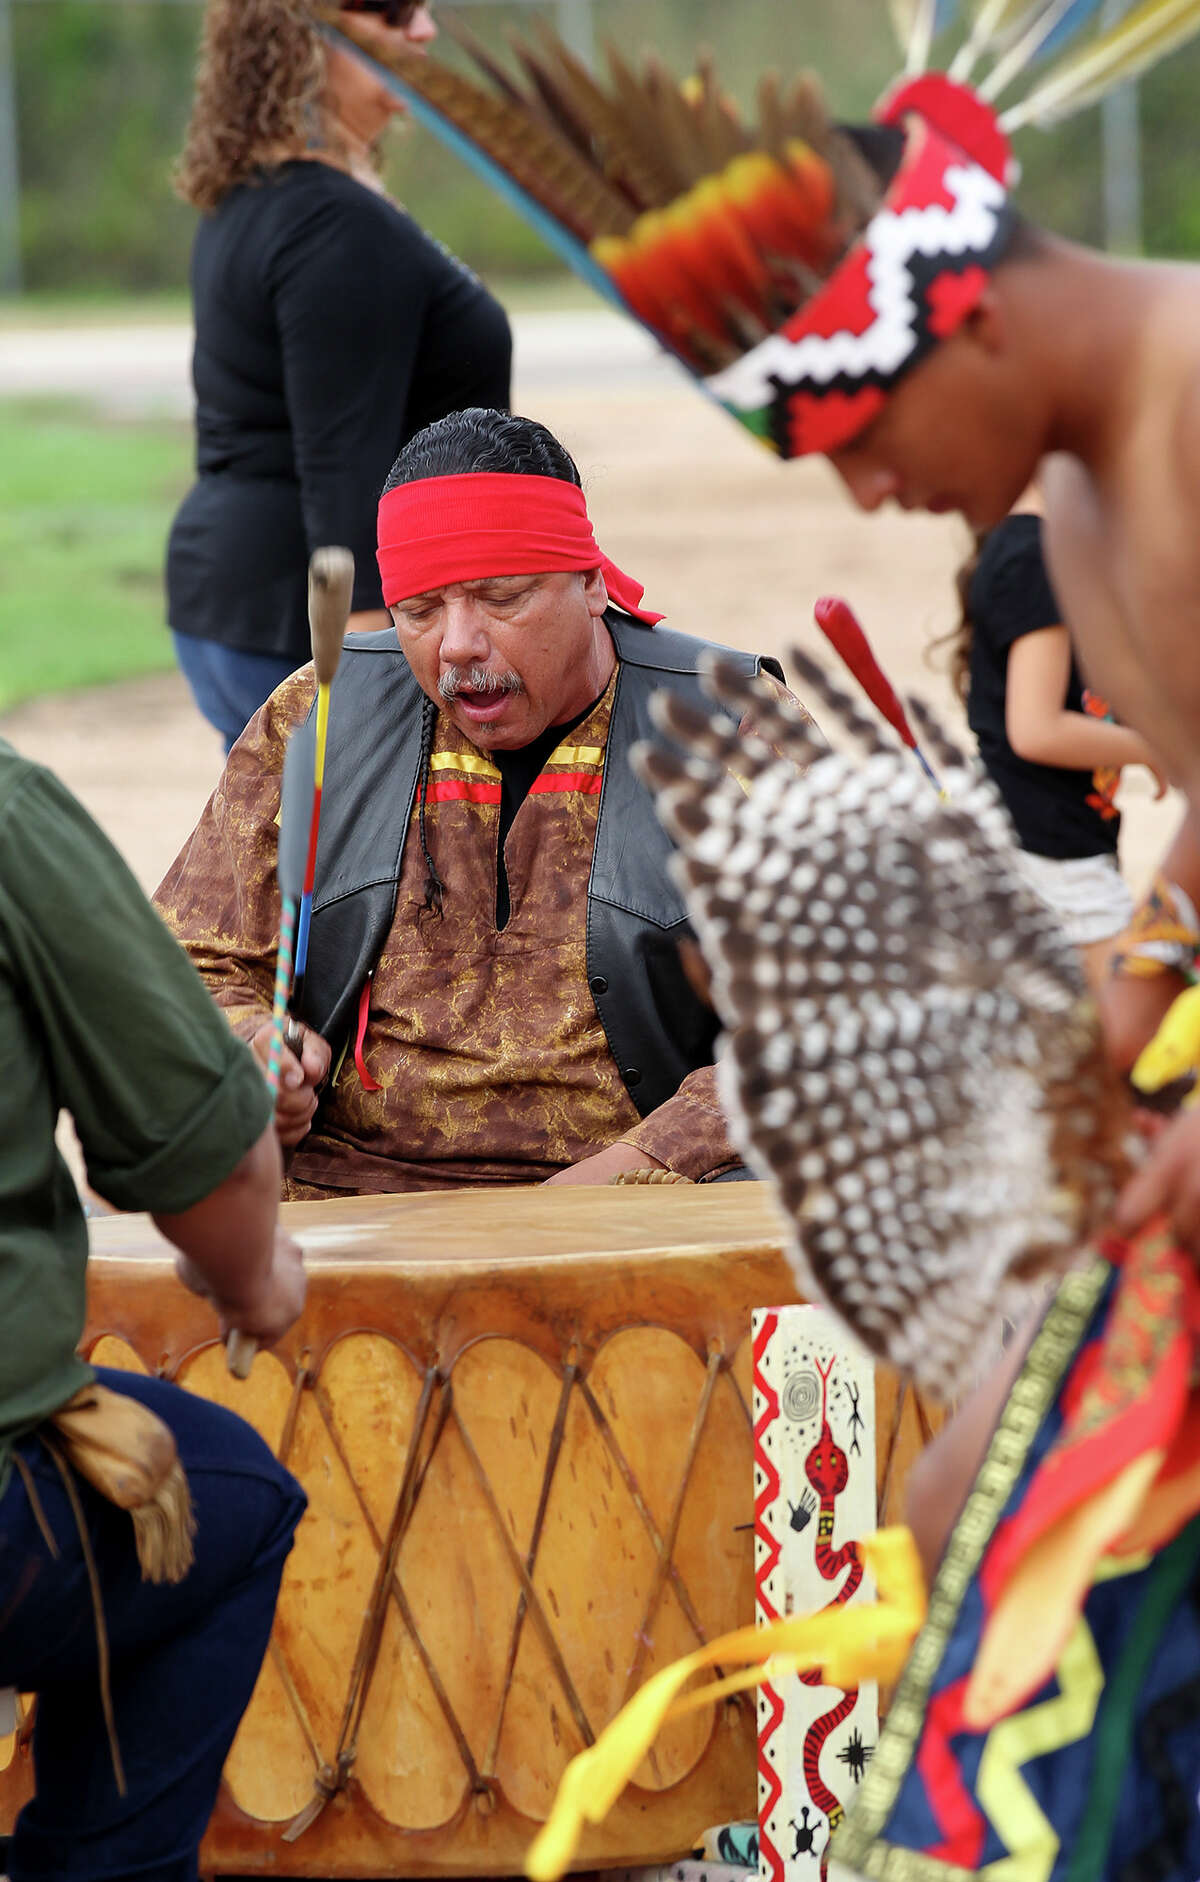 Amador Osio participates in a Native American blessing ceremony during the official opening of Mission Park Pavilions at the renovated Mission County Park, Sunday, Sept. 15, 2013. The renovation to the 1949-built park cost $6.9 million with $1.75 coming from a Texas Parks and Wildlife Department grant. The 60-acre park has a capacity of 3,000 and includes what the county touts as the latest and greatest outdoor music venue.